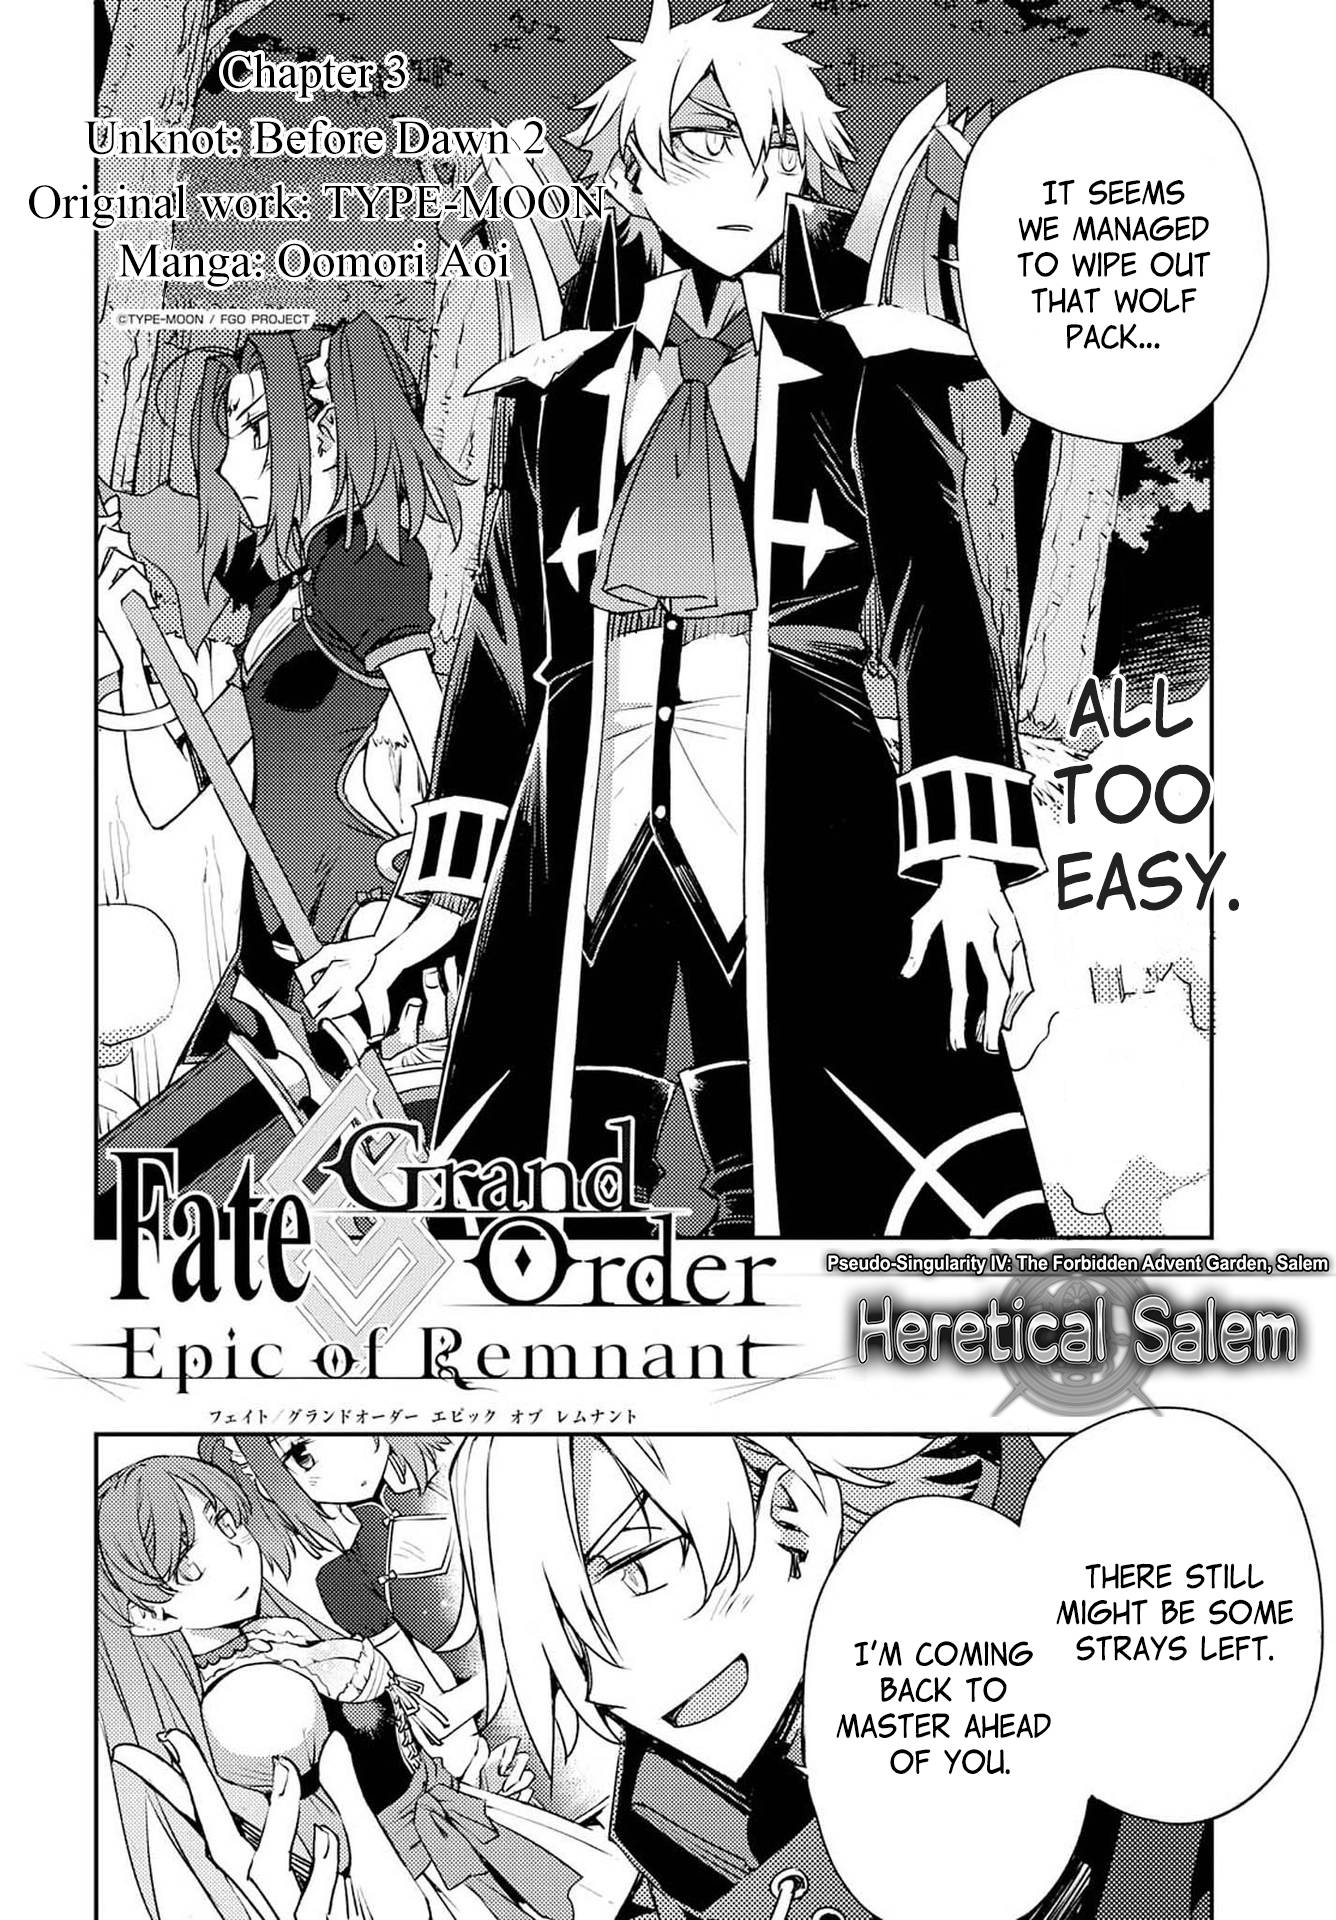 Fate/Grand Order: Epic of Remnant - Subspecies Singularity IV: Taboo Advent Salem: Salem of Heresy - chapter 3 - #4